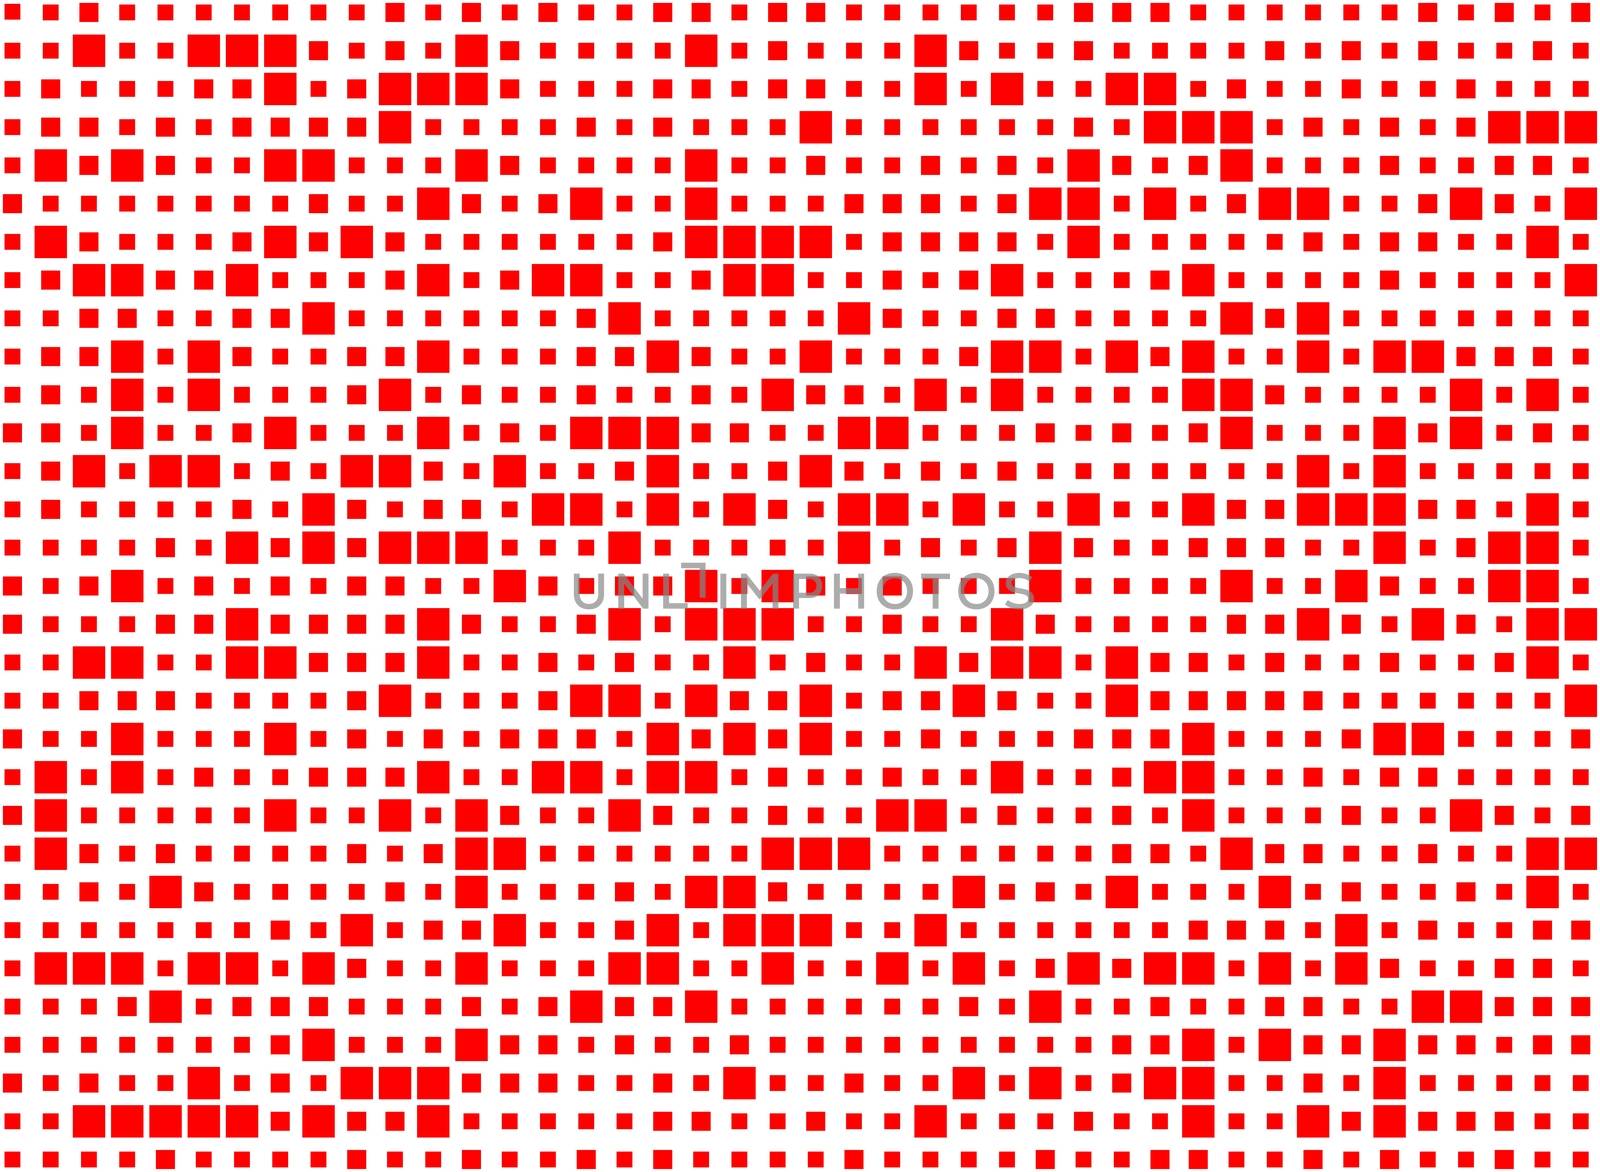 illustration of seamless pattern of square red background, different sizes shapes by Andreajk3